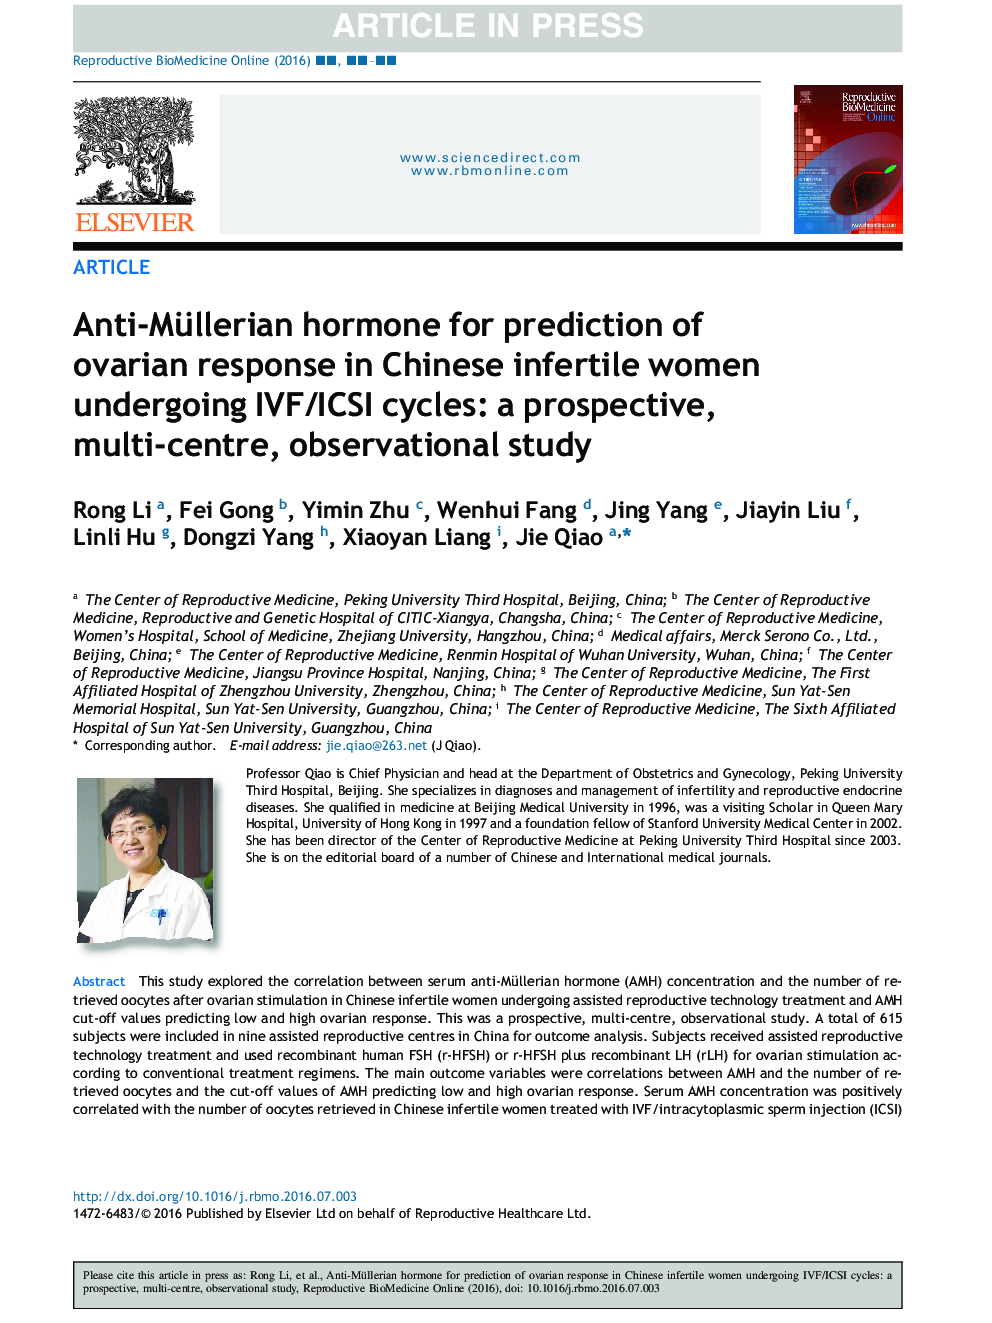 Anti-Müllerian hormone for prediction of ovarian response in Chinese infertile women undergoing IVF/ICSI cycles: a prospective, multi-centre, observational study